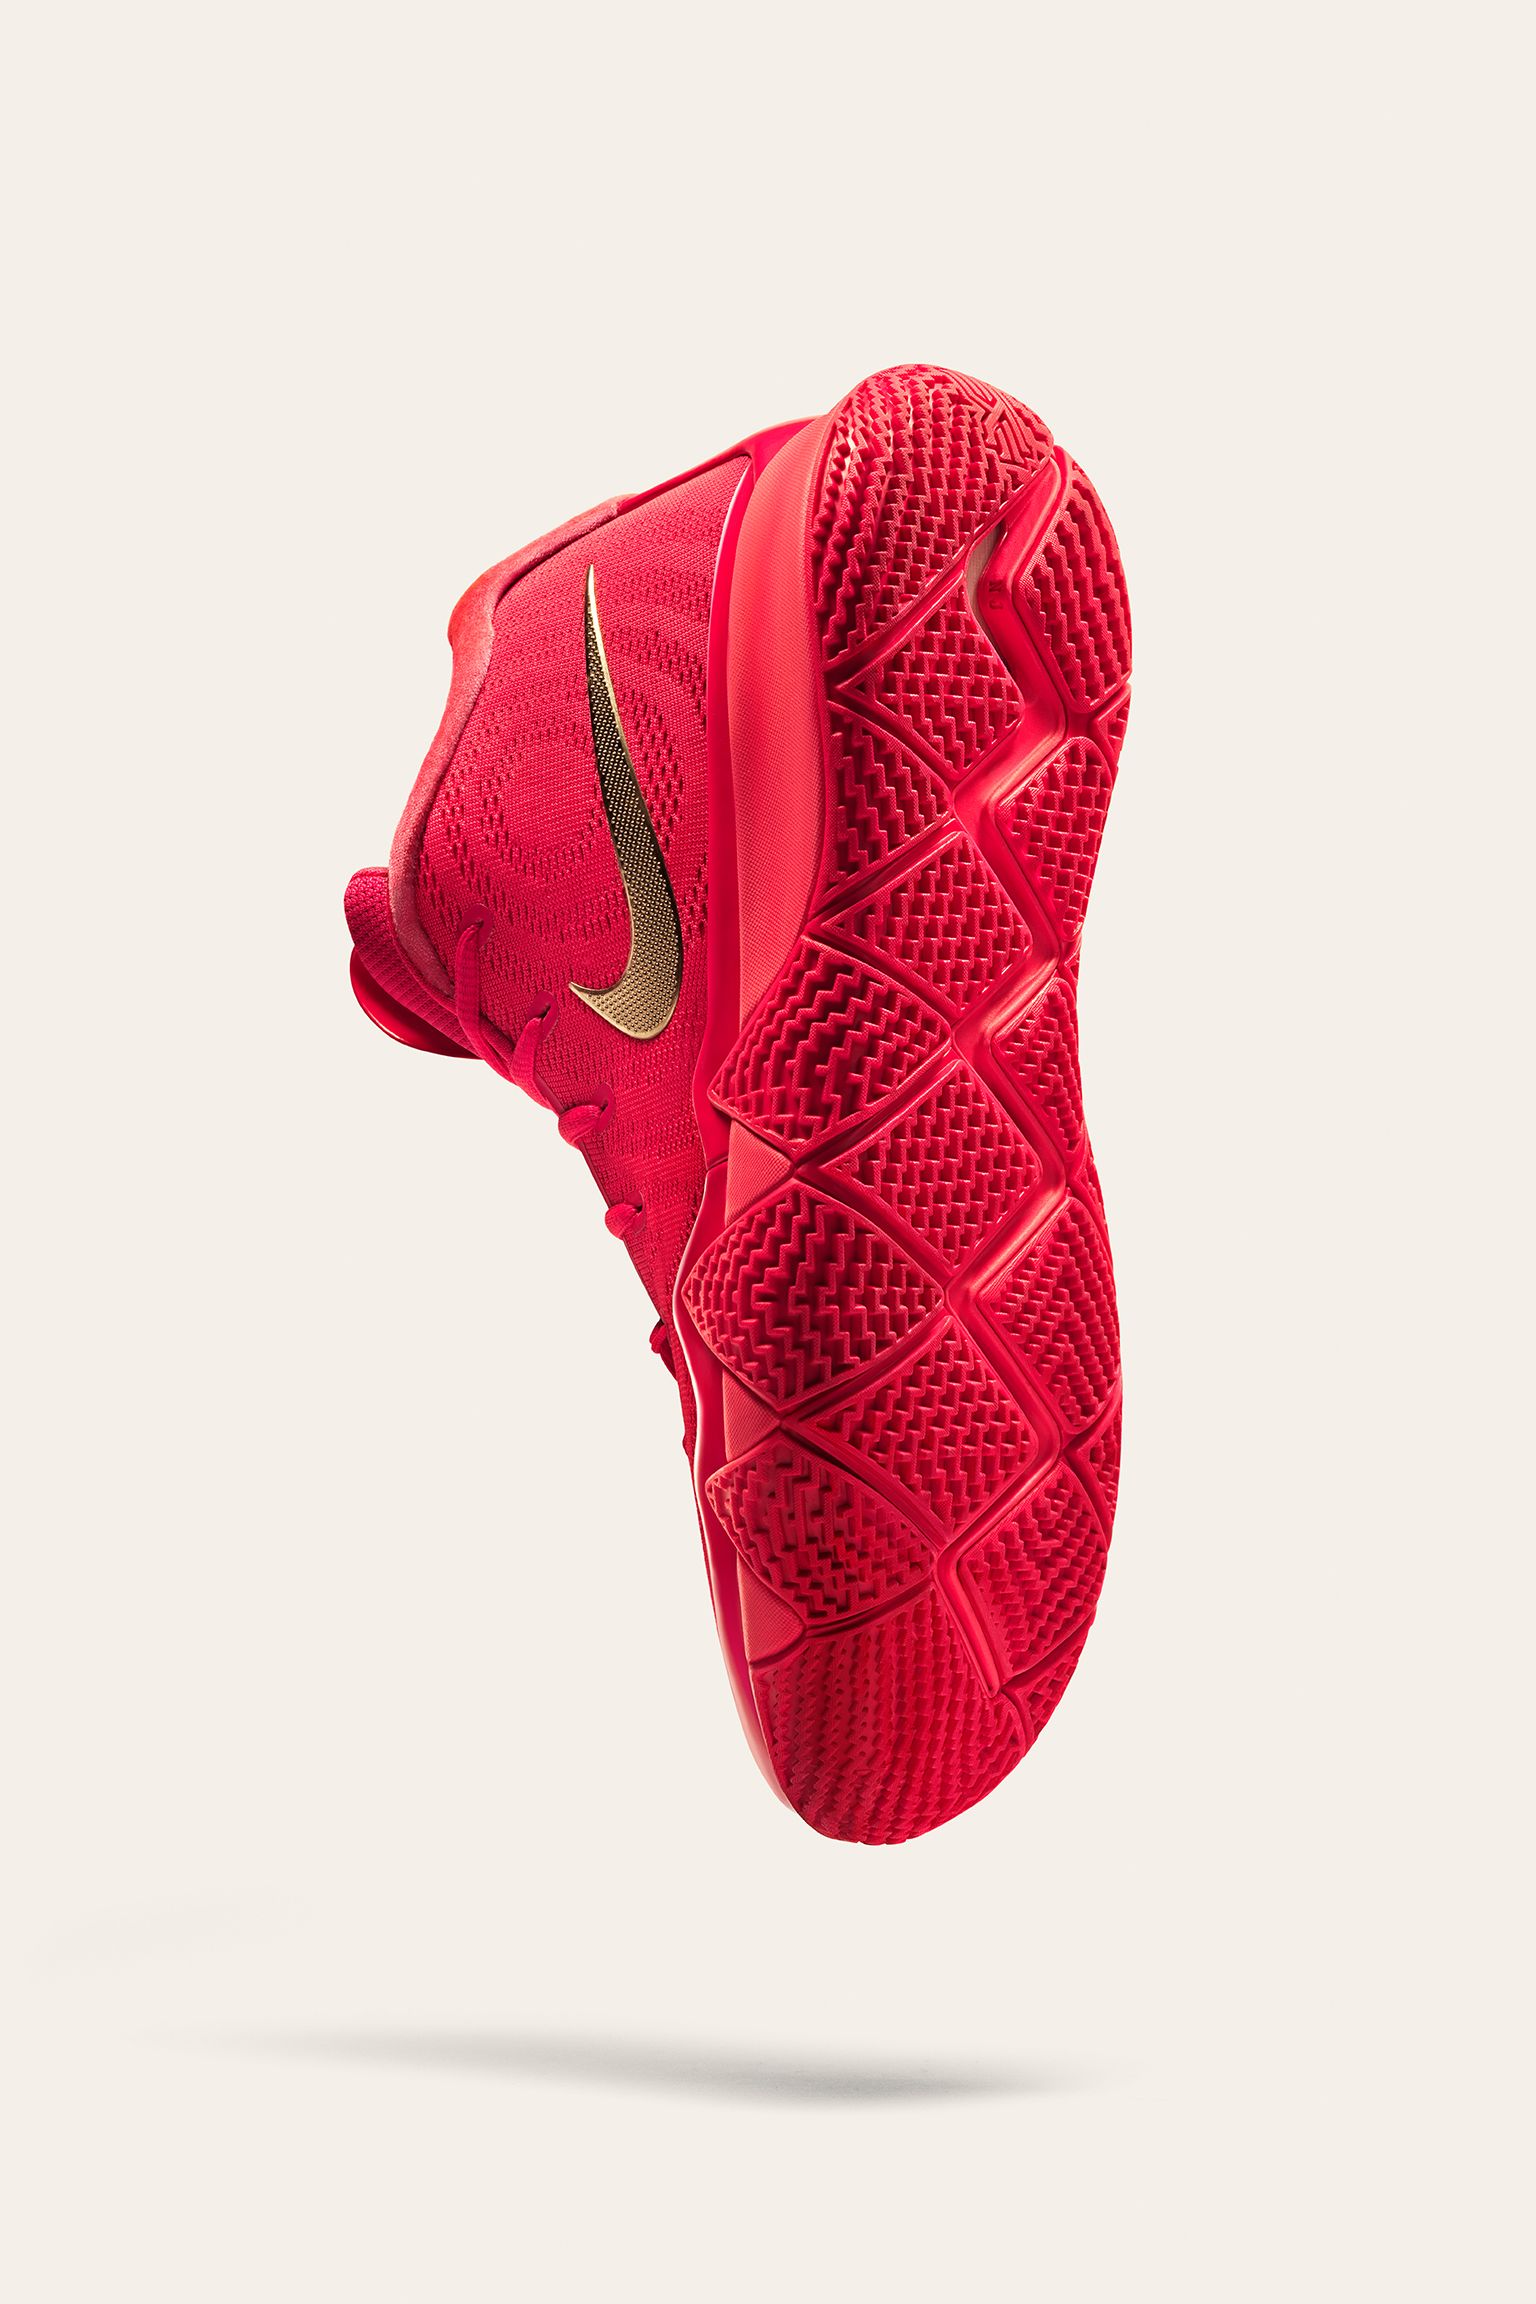 kyrie 4 flytrap red